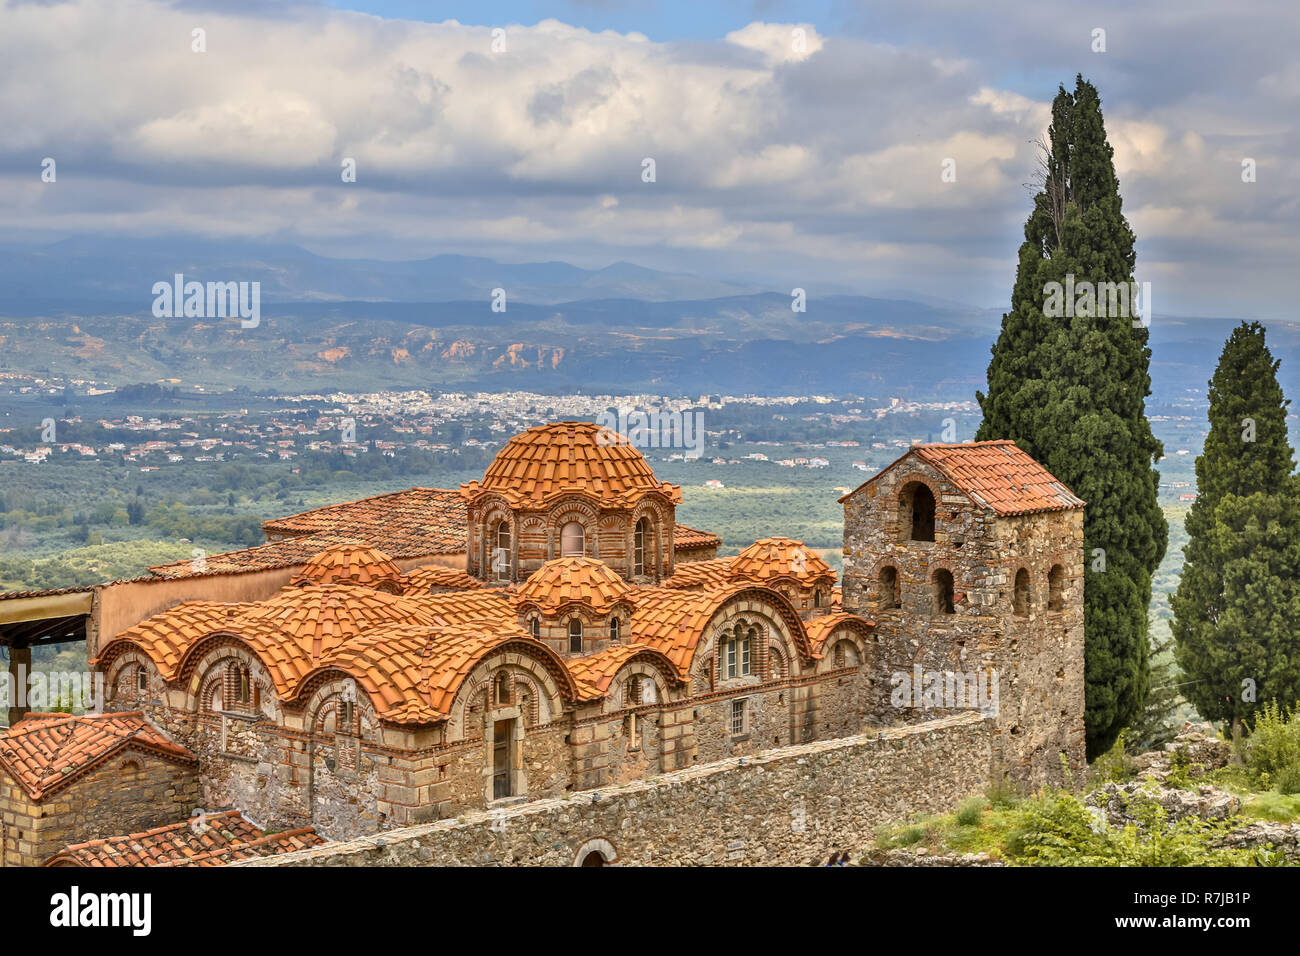 Monastery buildings in the medieval Byzantine ghost town-castle of Mystras, Peloponnese, Greece Stock Photo